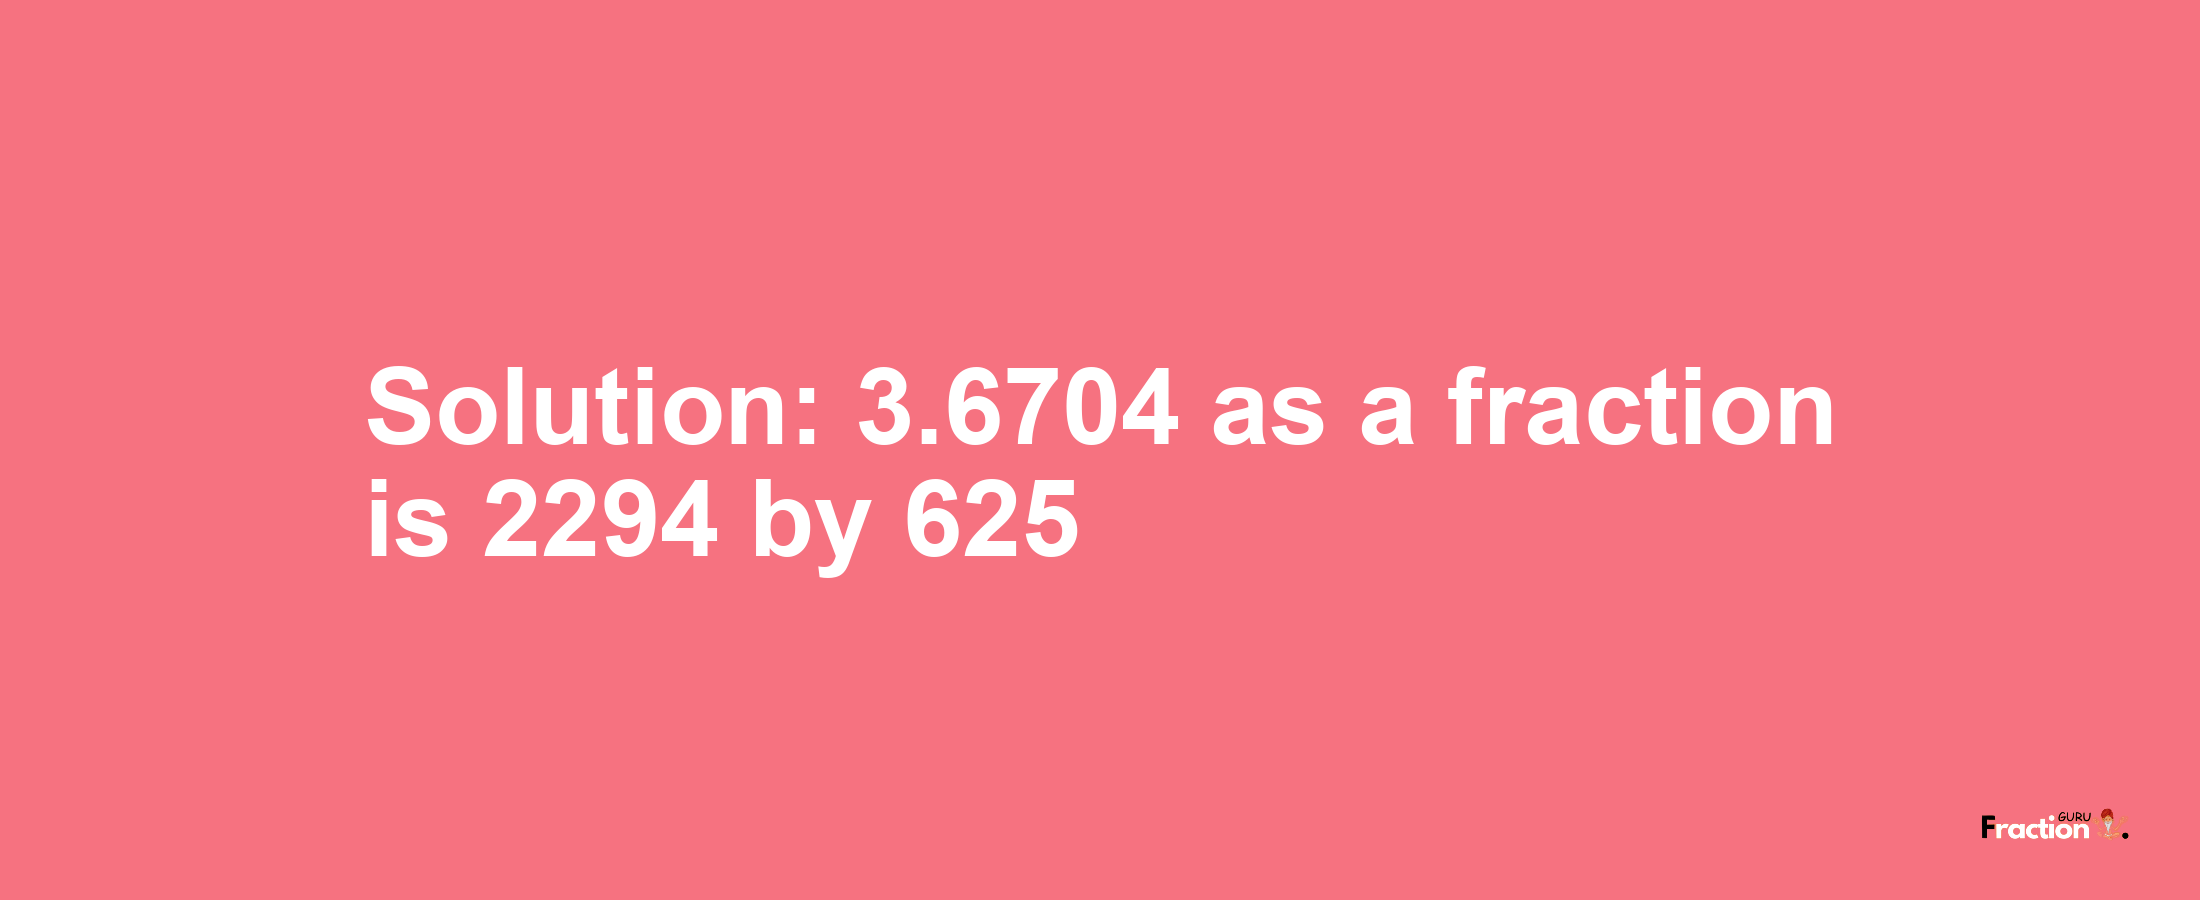 Solution:3.6704 as a fraction is 2294/625